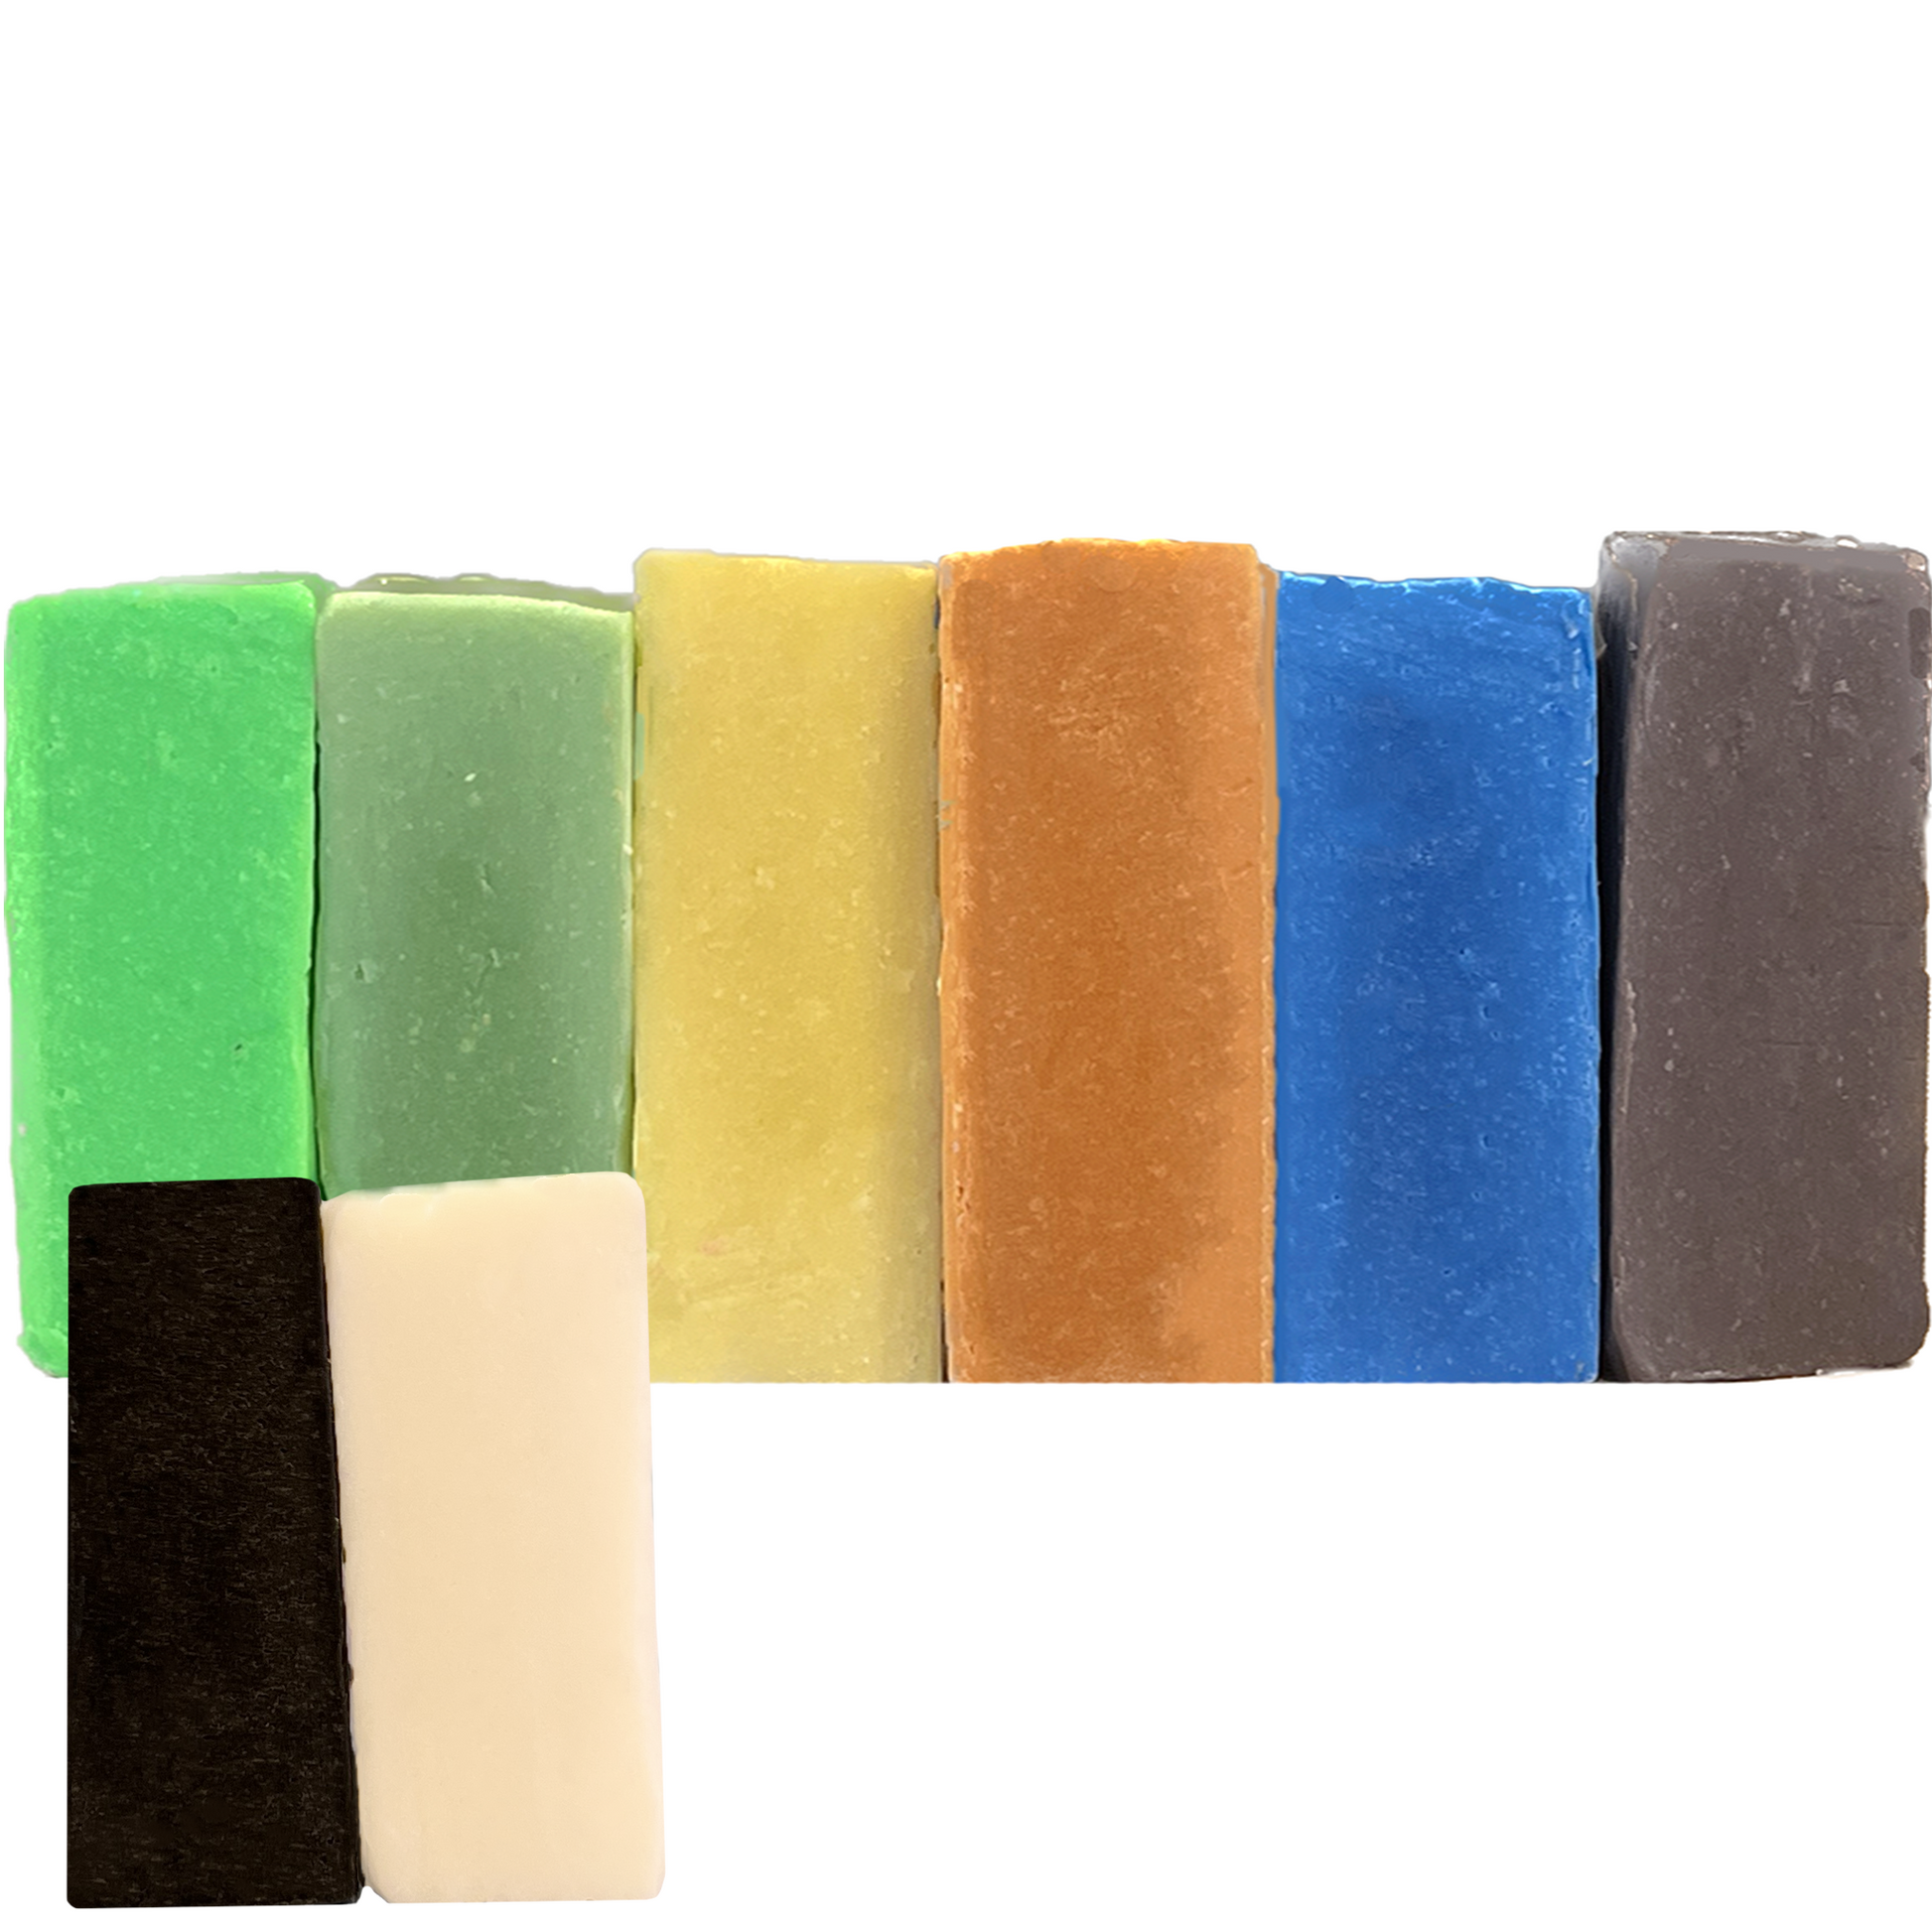 Soap Dough Co. - Jungle Kit - neon green, kermit green, yellow, orange, neon blue, brown, with black and white accent colors.